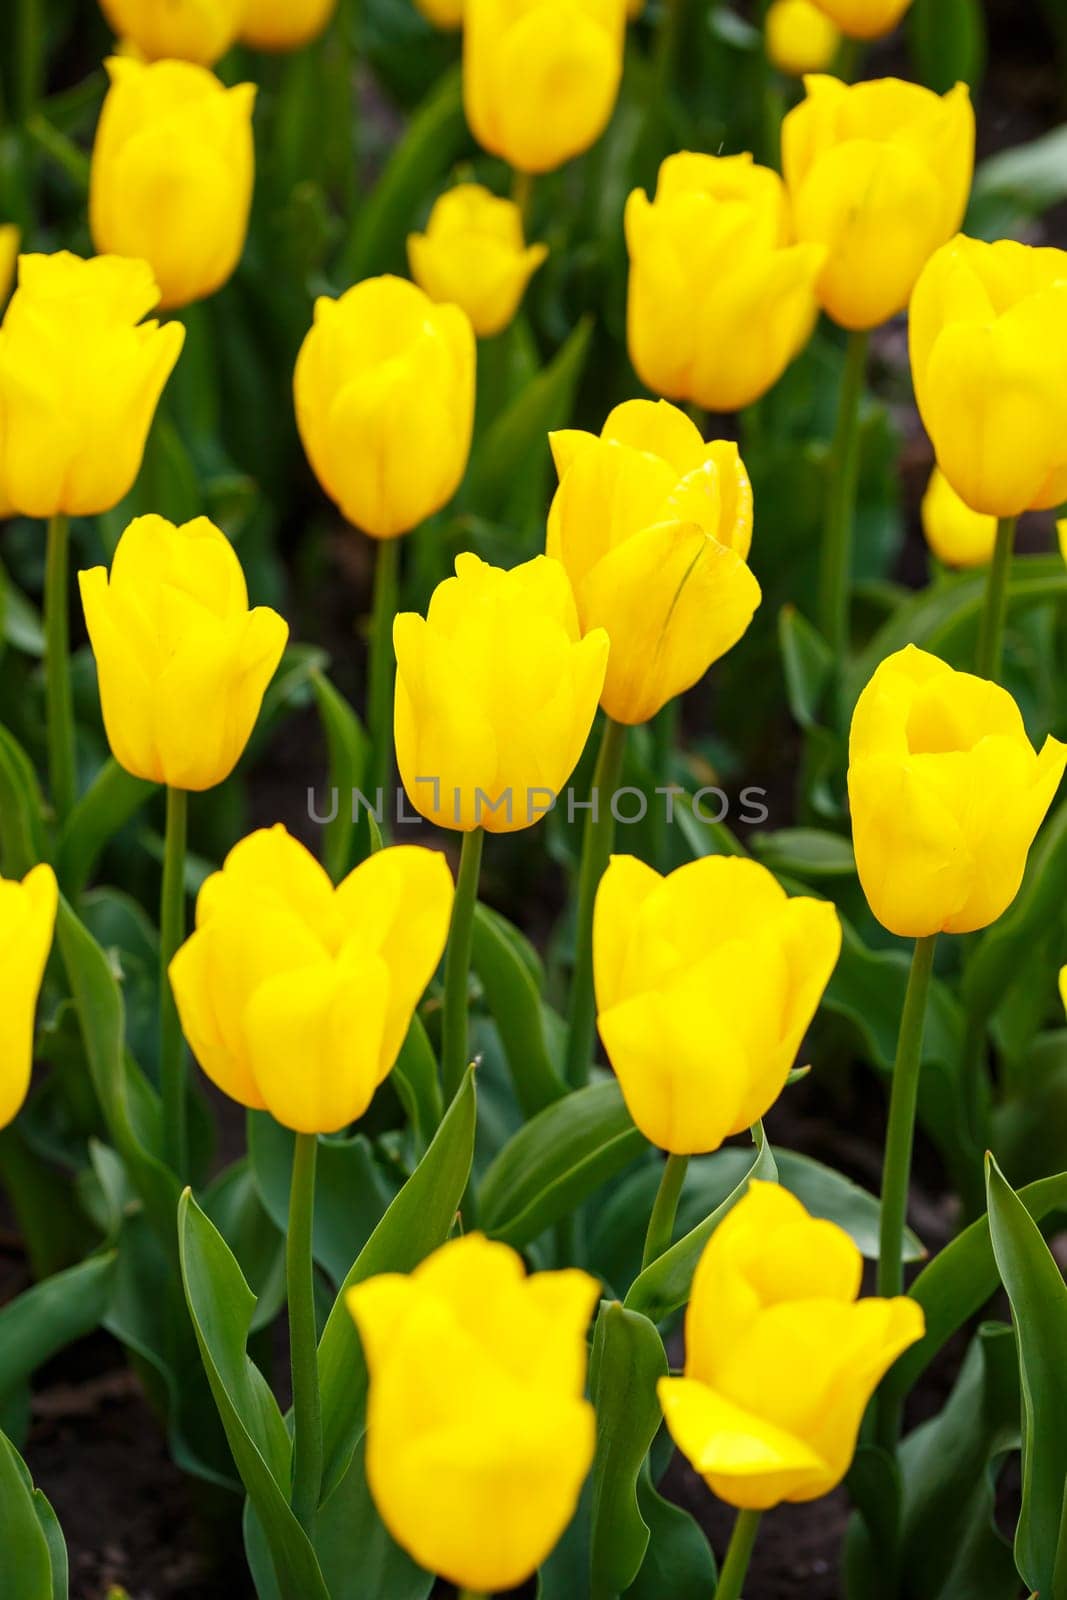 The photo was taken in the city park tulip alley. In the photo, yellow tulips are blooming by Dmitrytph